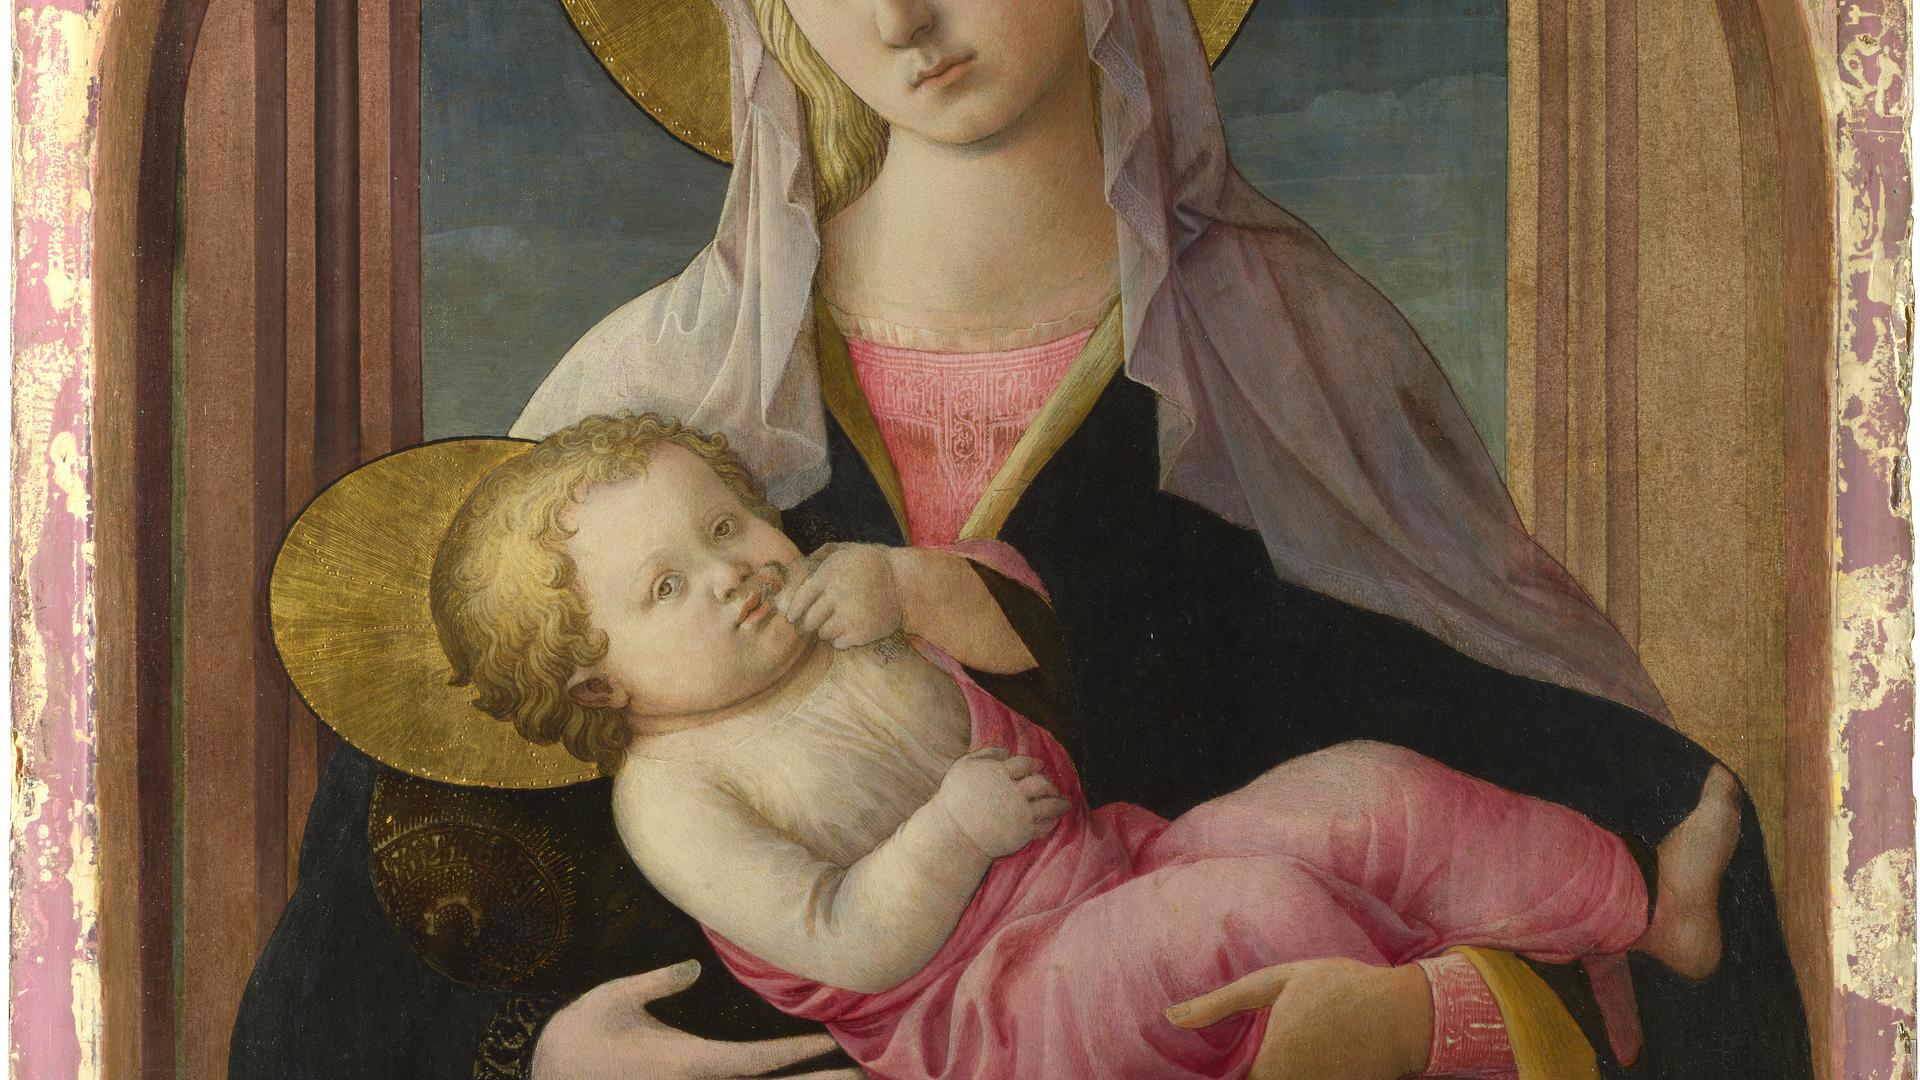 The Virgin and Child by Fra Filippo Lippi and workshop